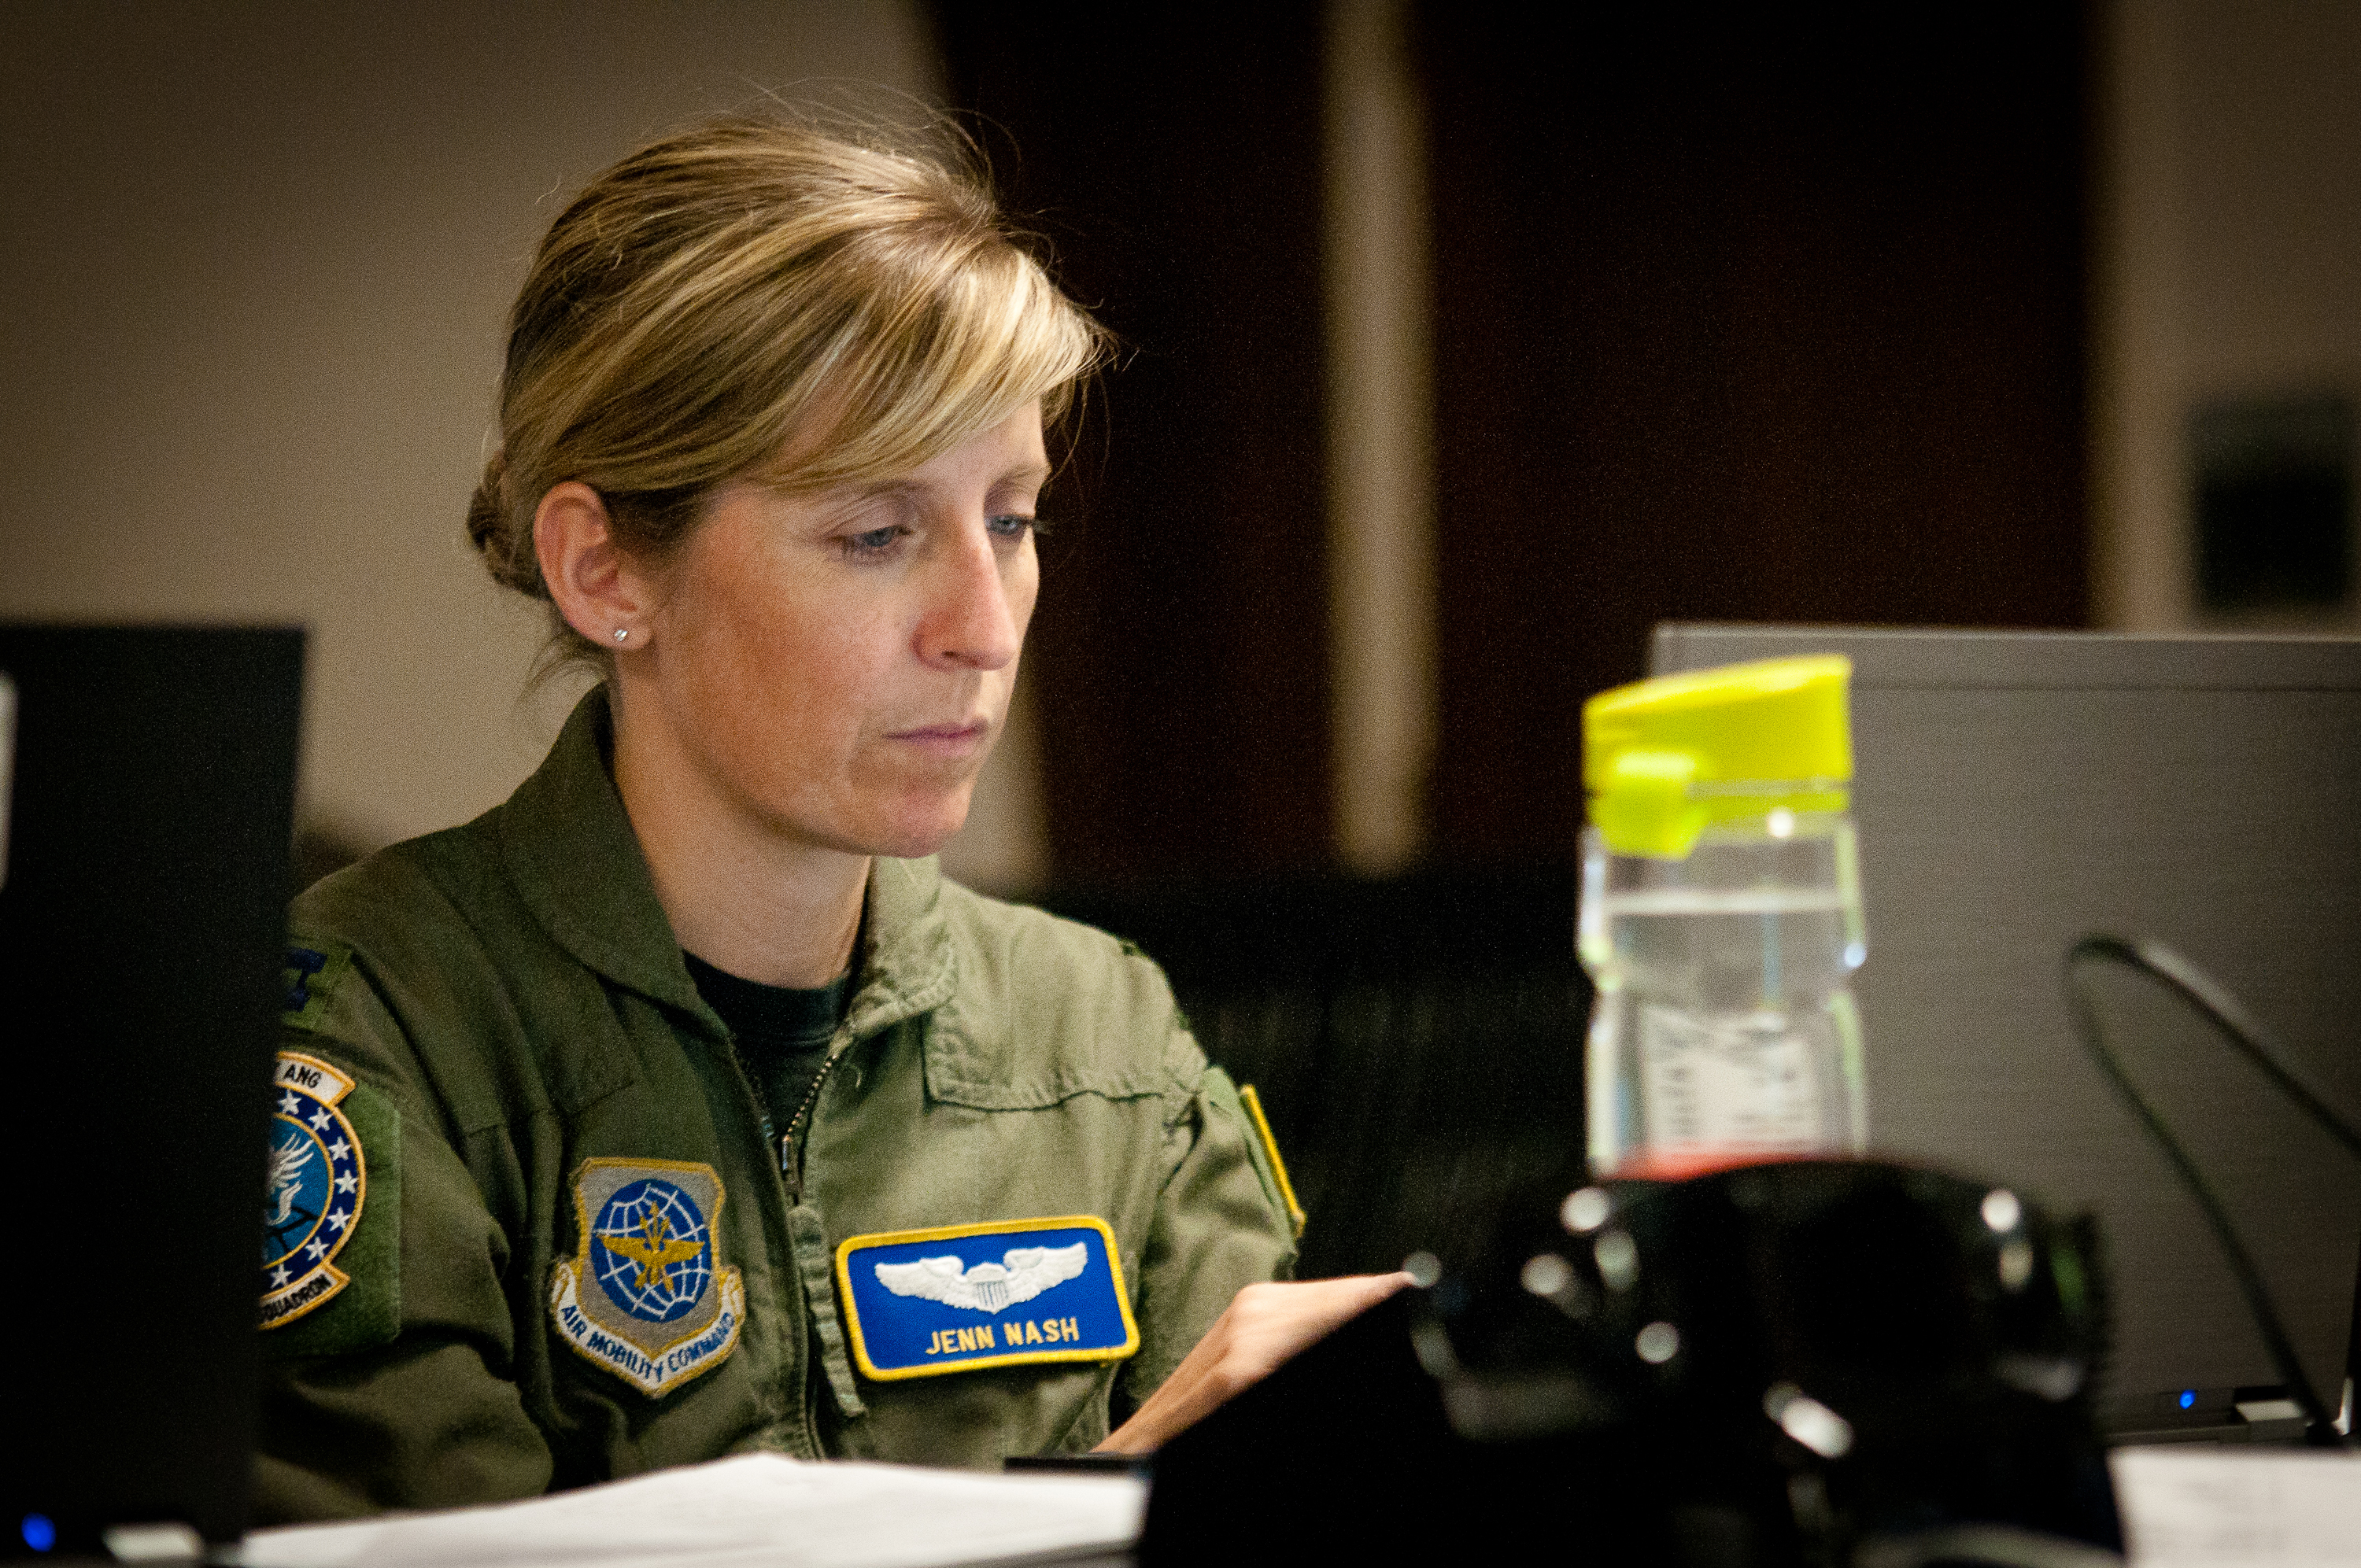 Joint Air Operations Center Stand Up Part Of National Level Exercise